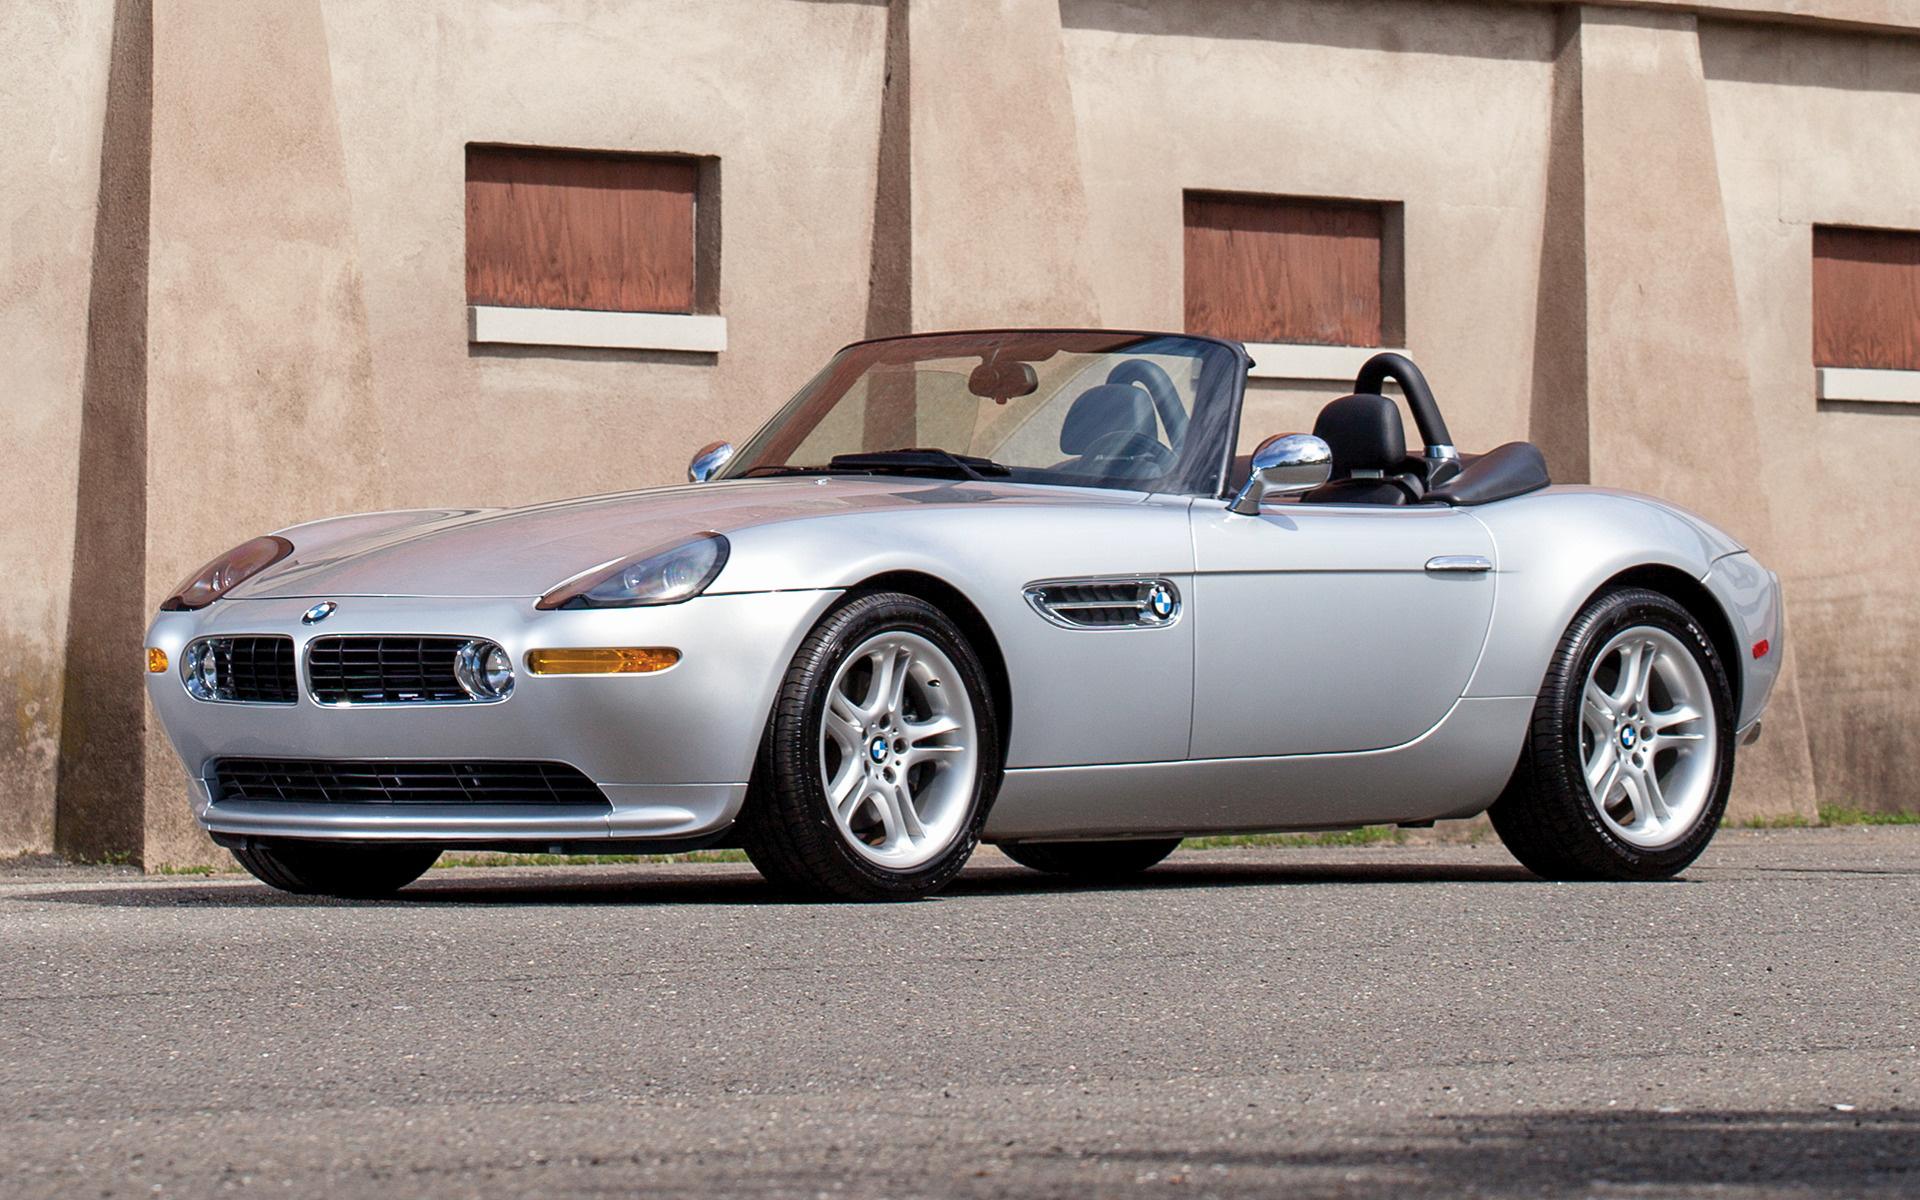 BMW Z8 (US) and HD Image